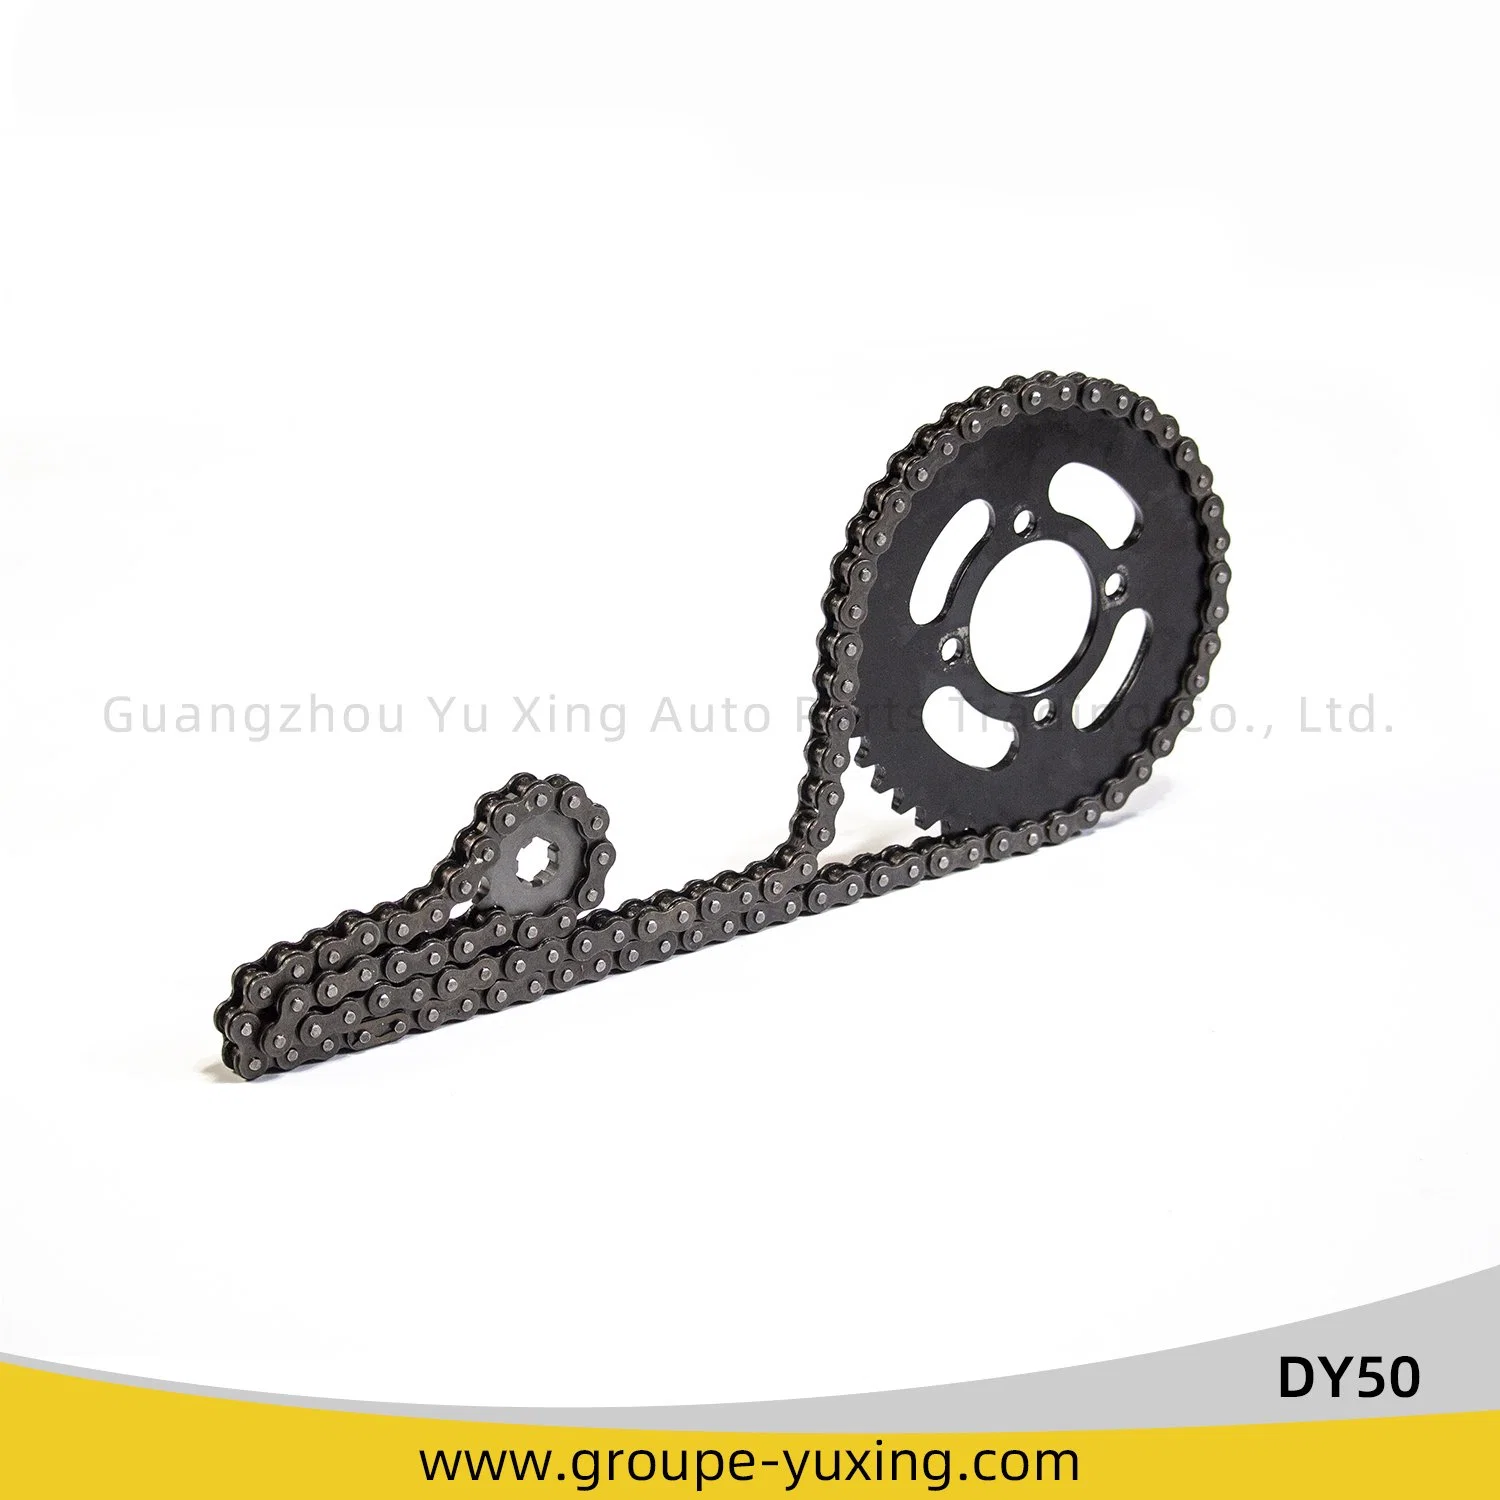 Factory Motorcycle Spare Part Sprocket and Chain Kit Motorcycle Parts for Dy50